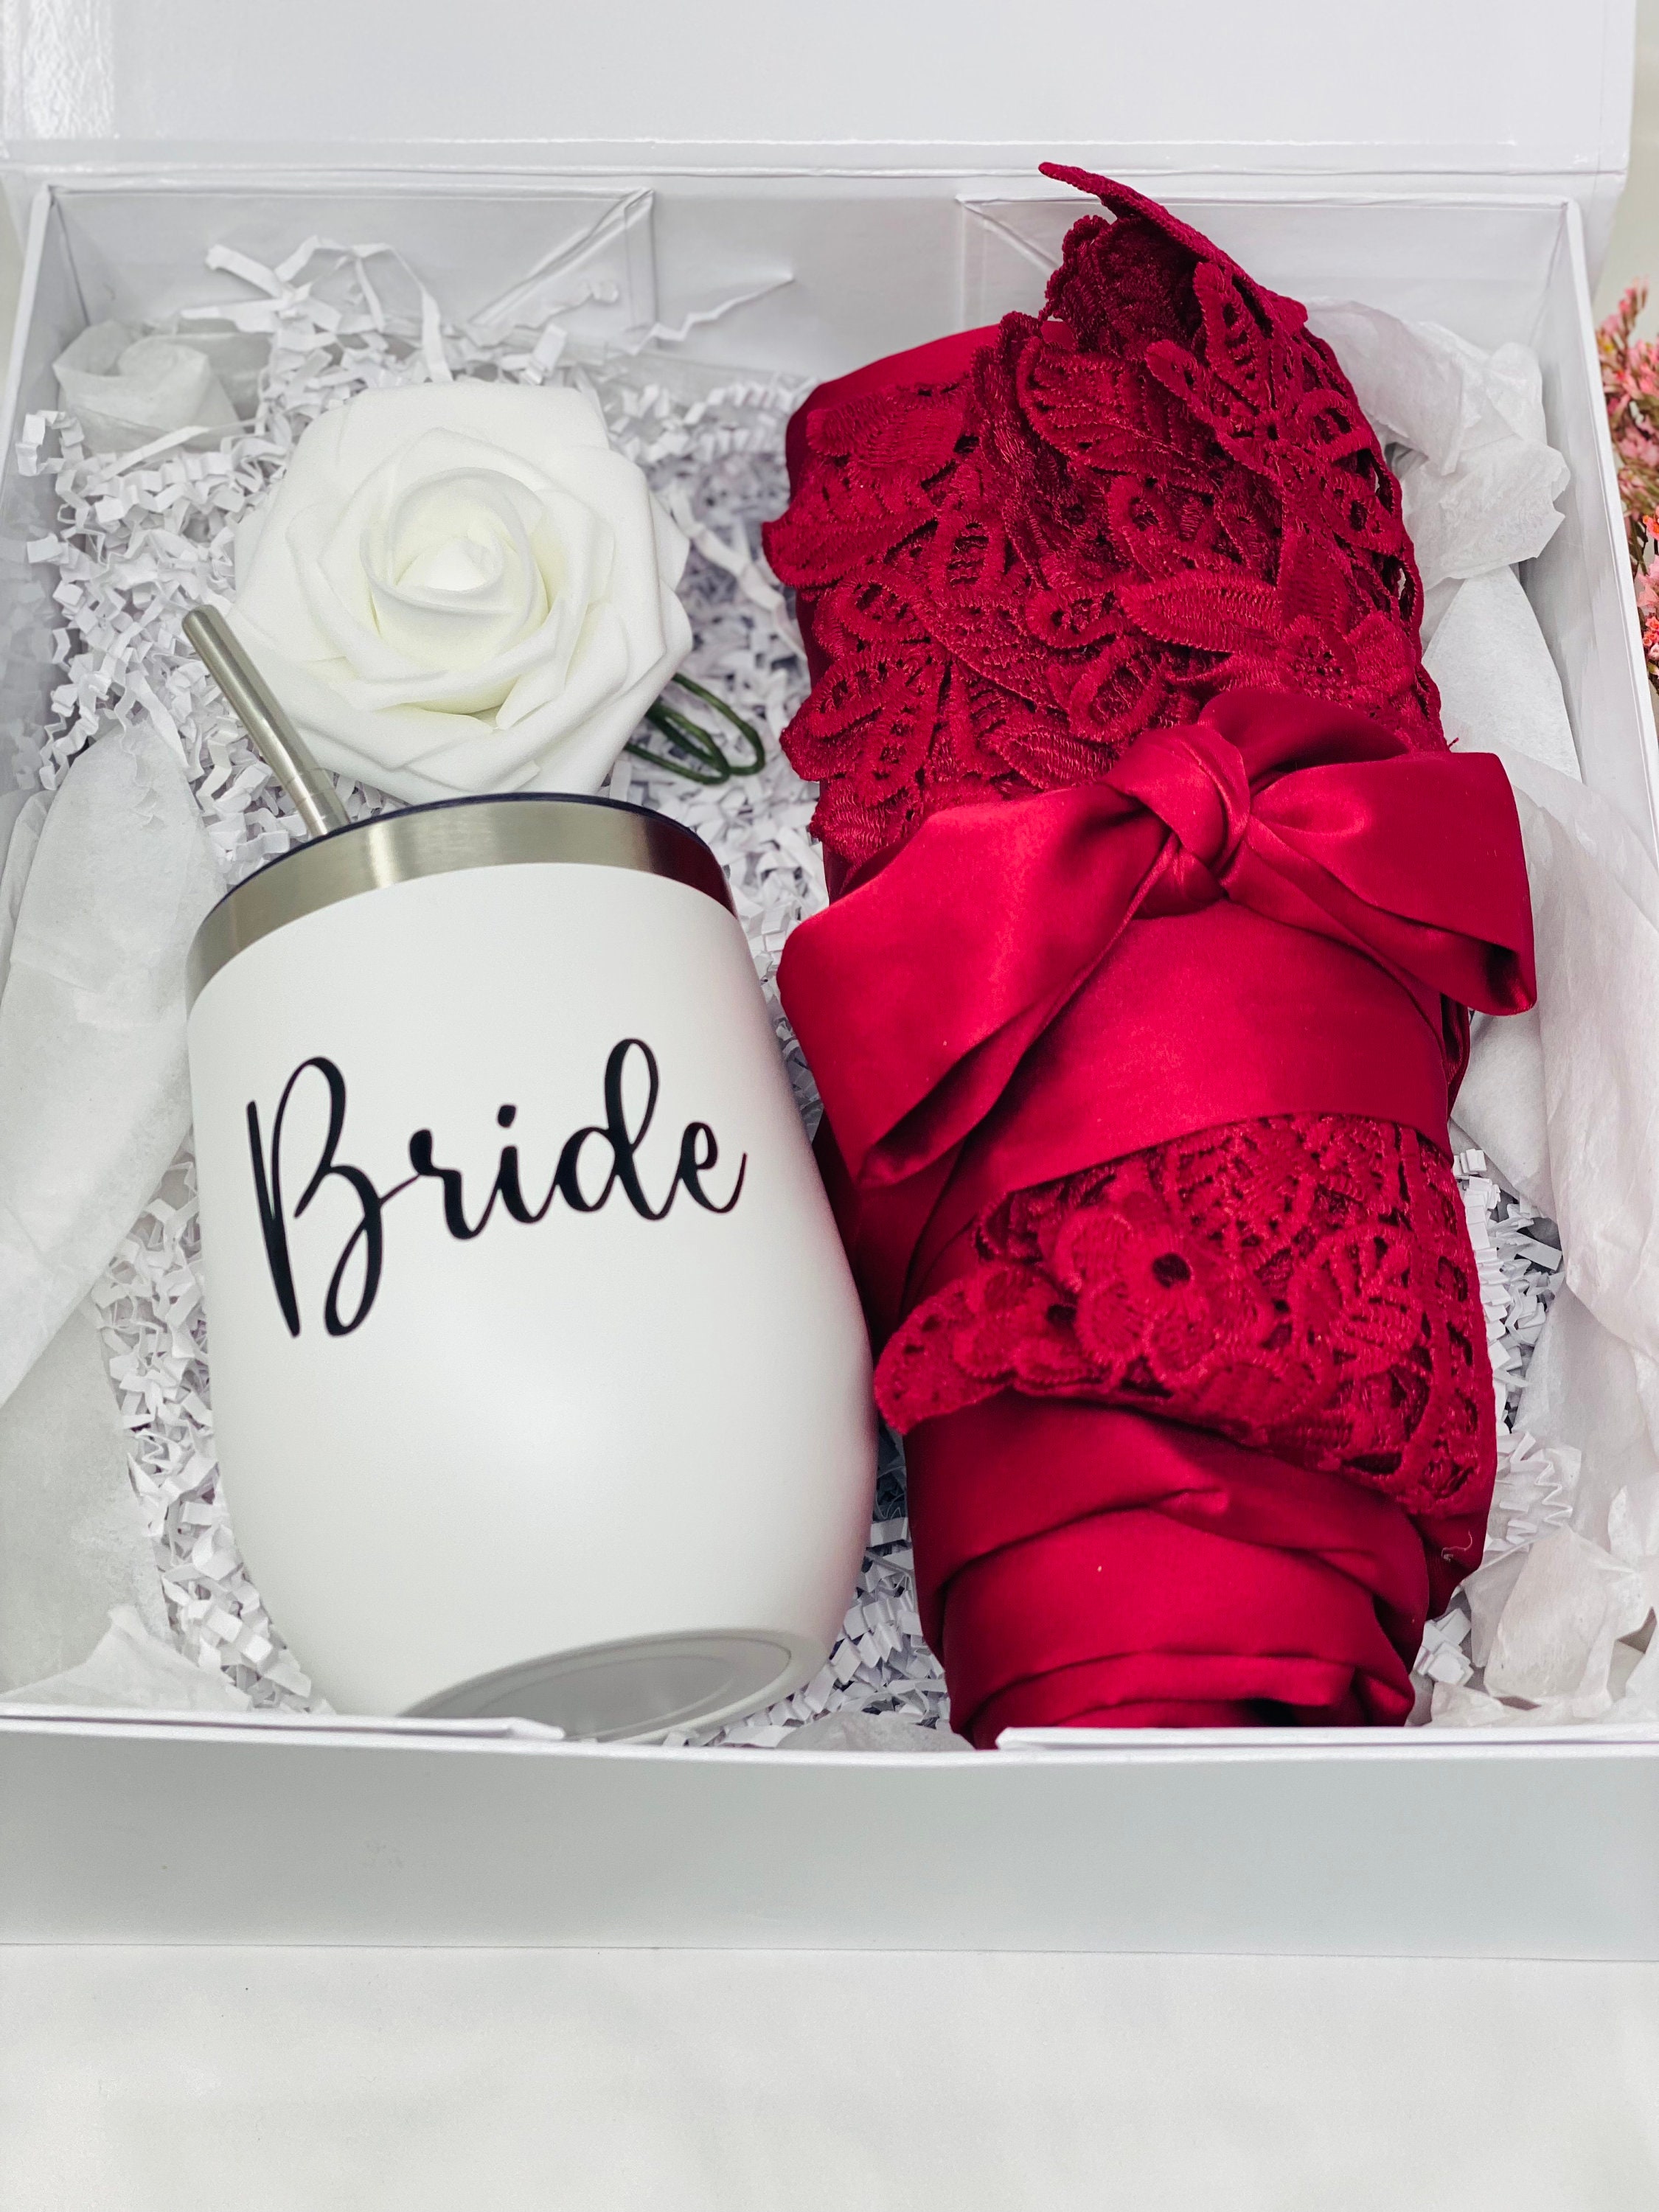 Bridal Shower Gift for Bride to Be Unique / Personalized Wedding